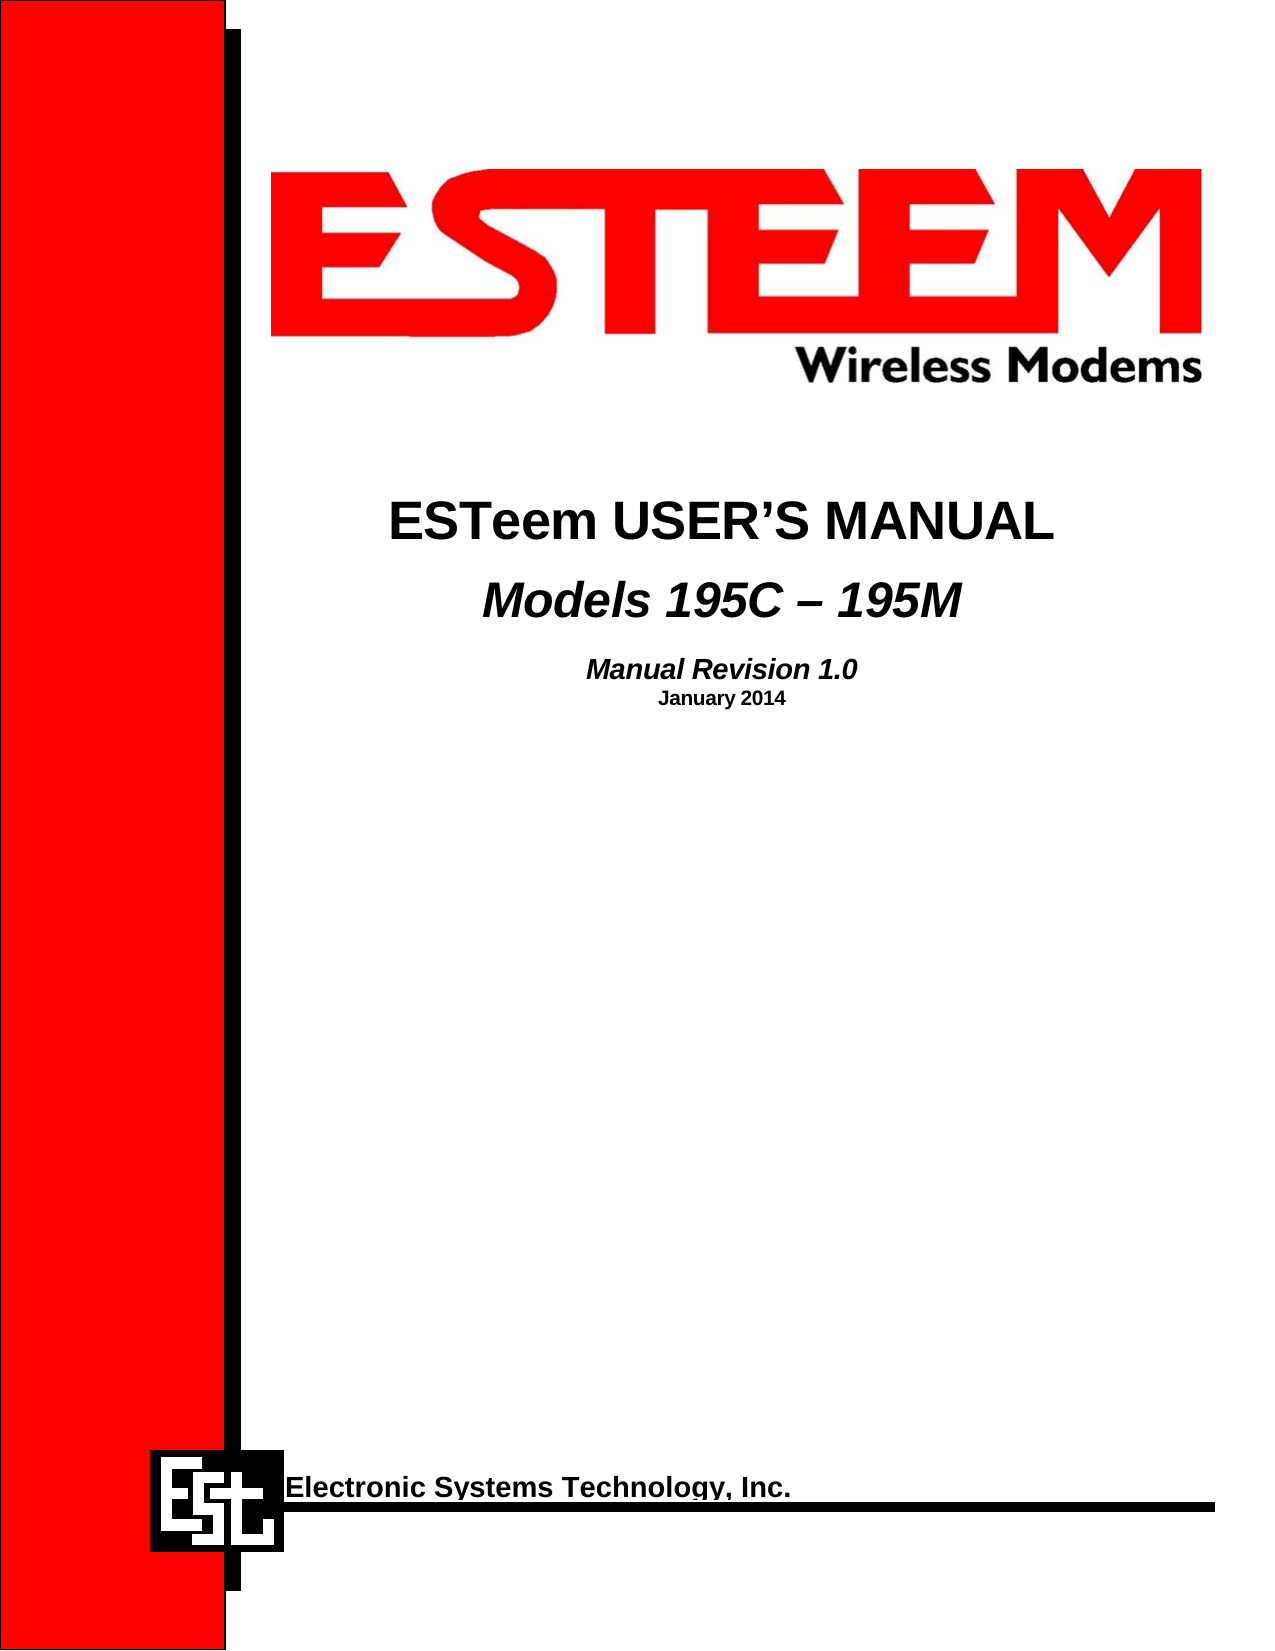                 ESTeem USER’S MANUAL  Models 195C – 195M   Manual Revision 1.0 January 2014      Electronic Systems Technology, Inc.